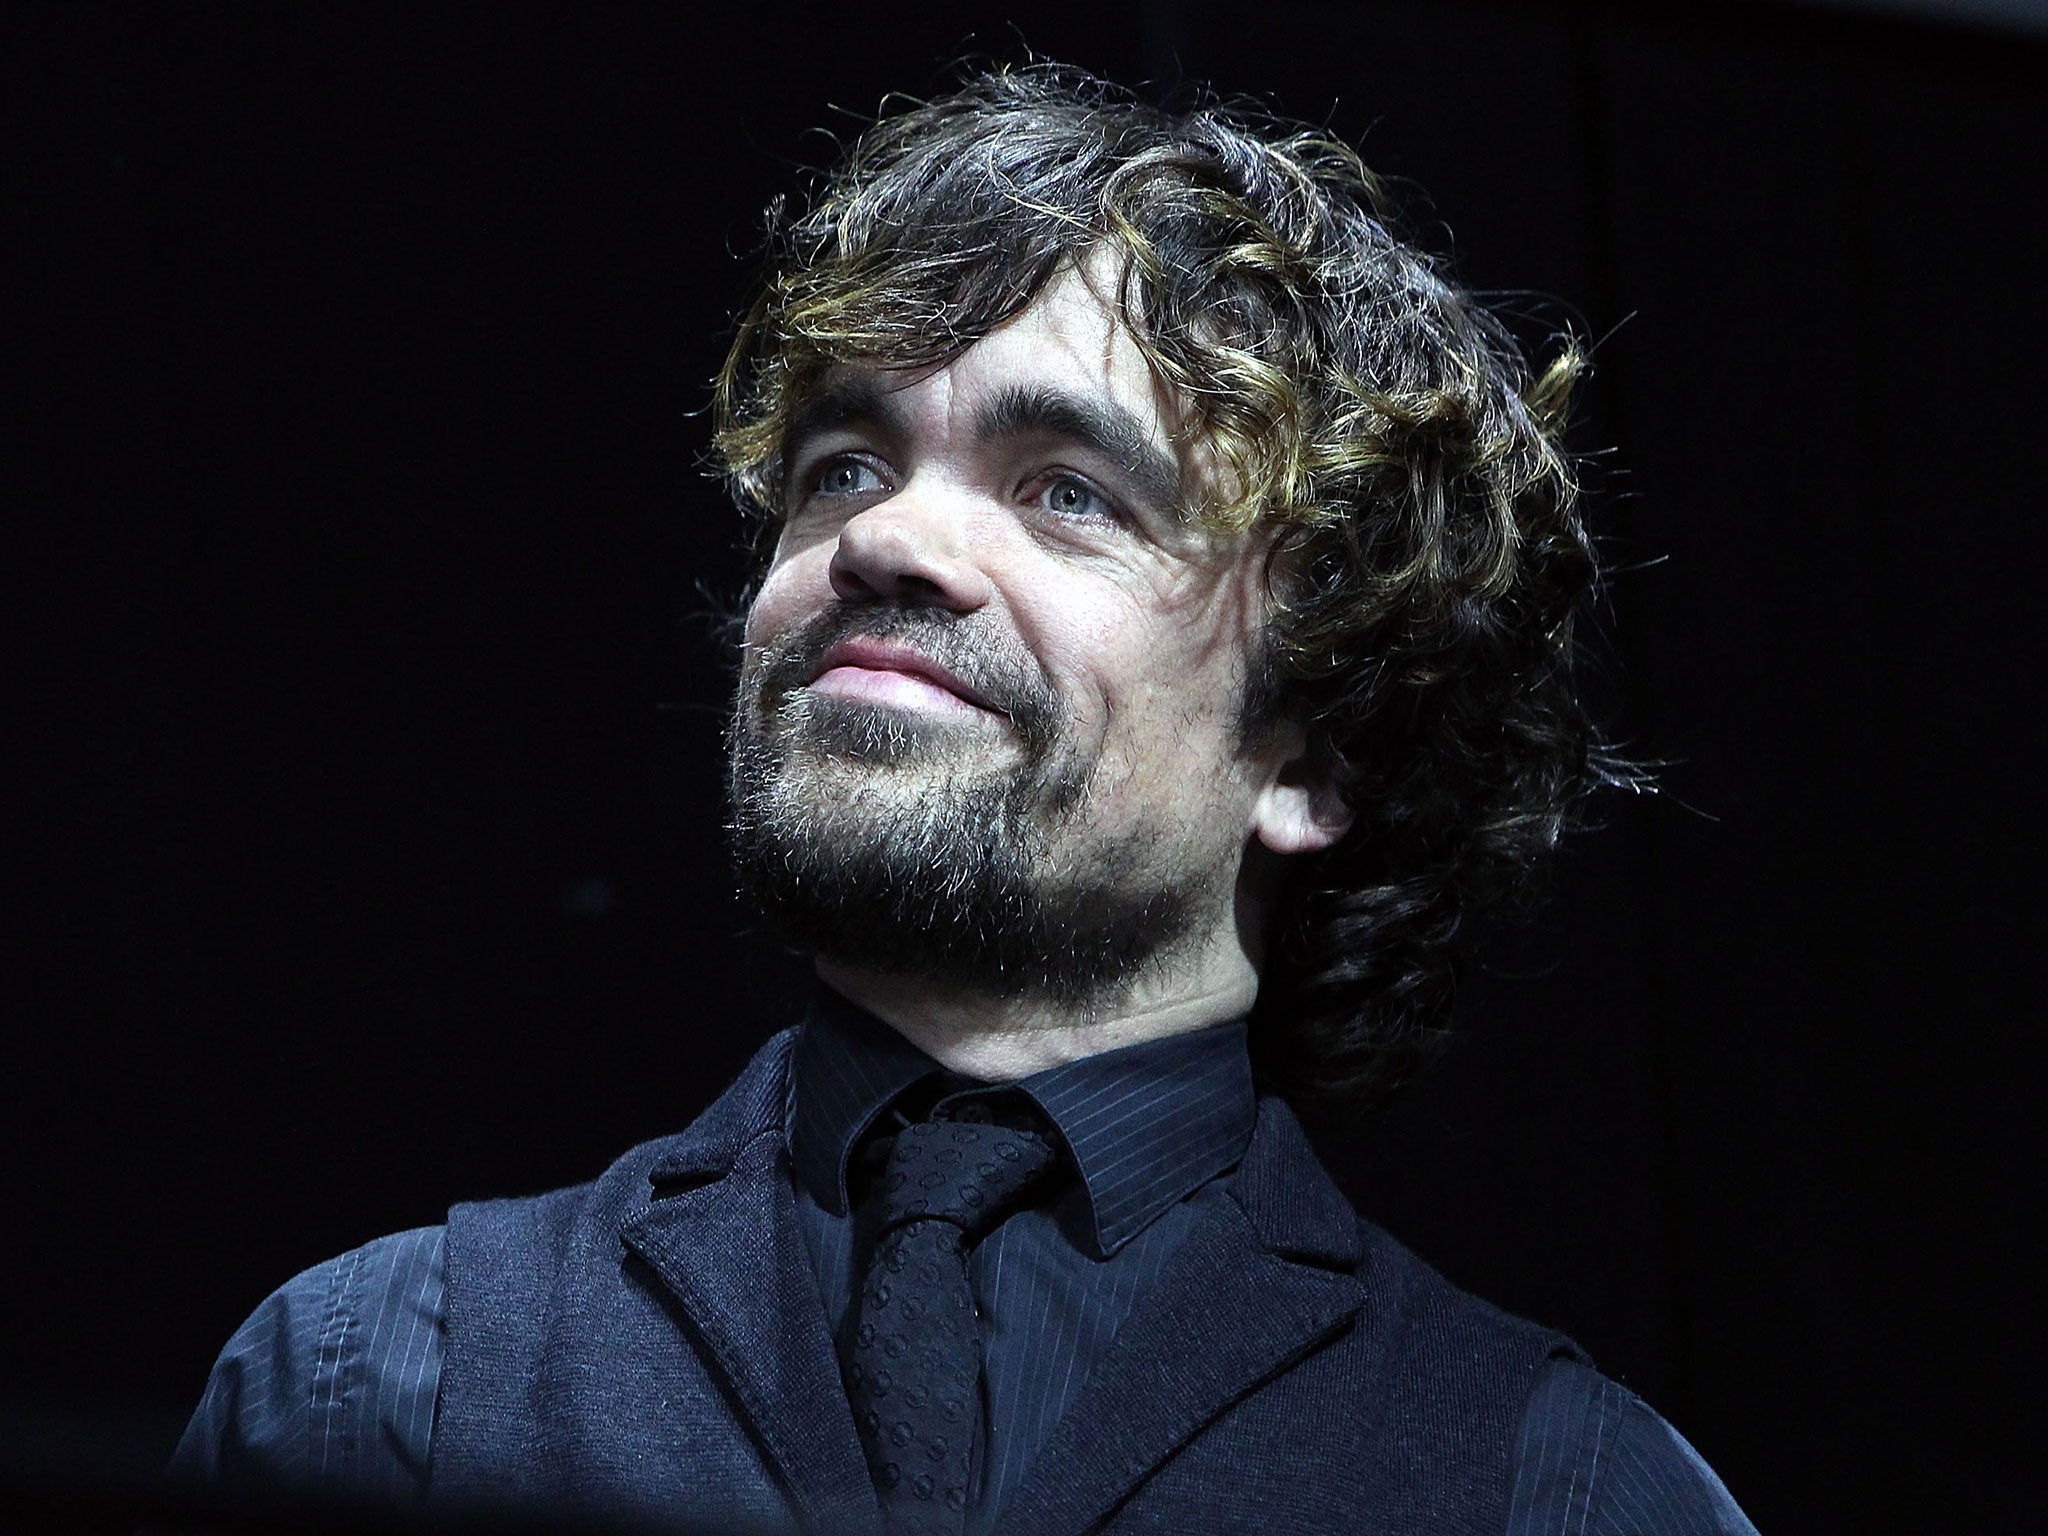 Golden Globe winner Peter Dinklage is favourite to play the villain in Paul Feig's Ghostbusters reboot